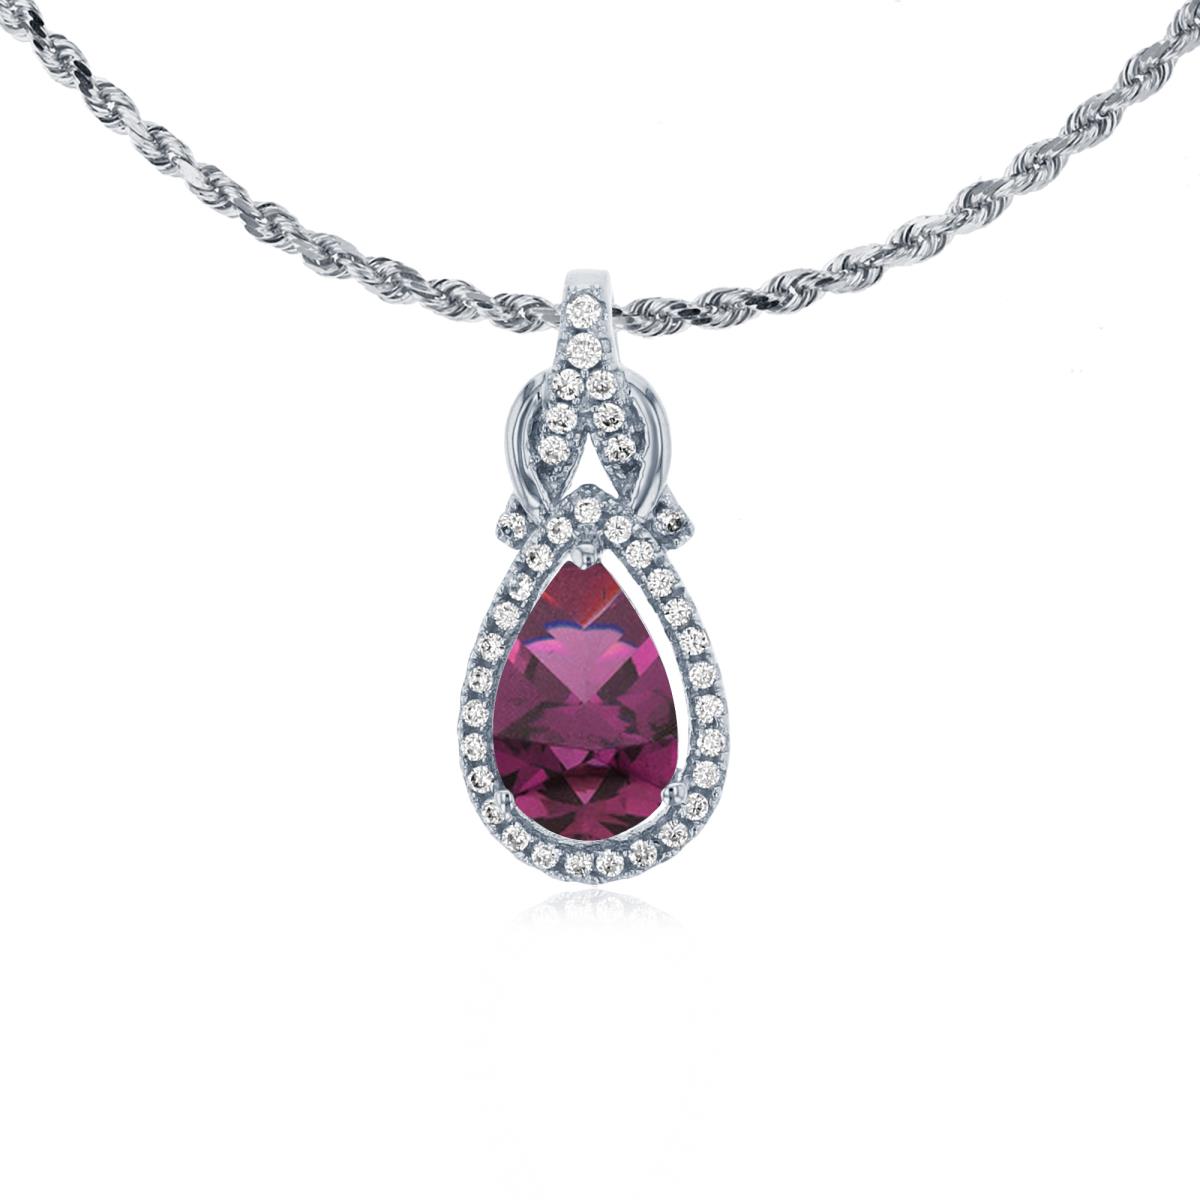 10K White Gold 8x5mm Pear Cut Rhodolite & 0.11 CTTW Rnd Diamond Knot 18" Rope Chain Necklace